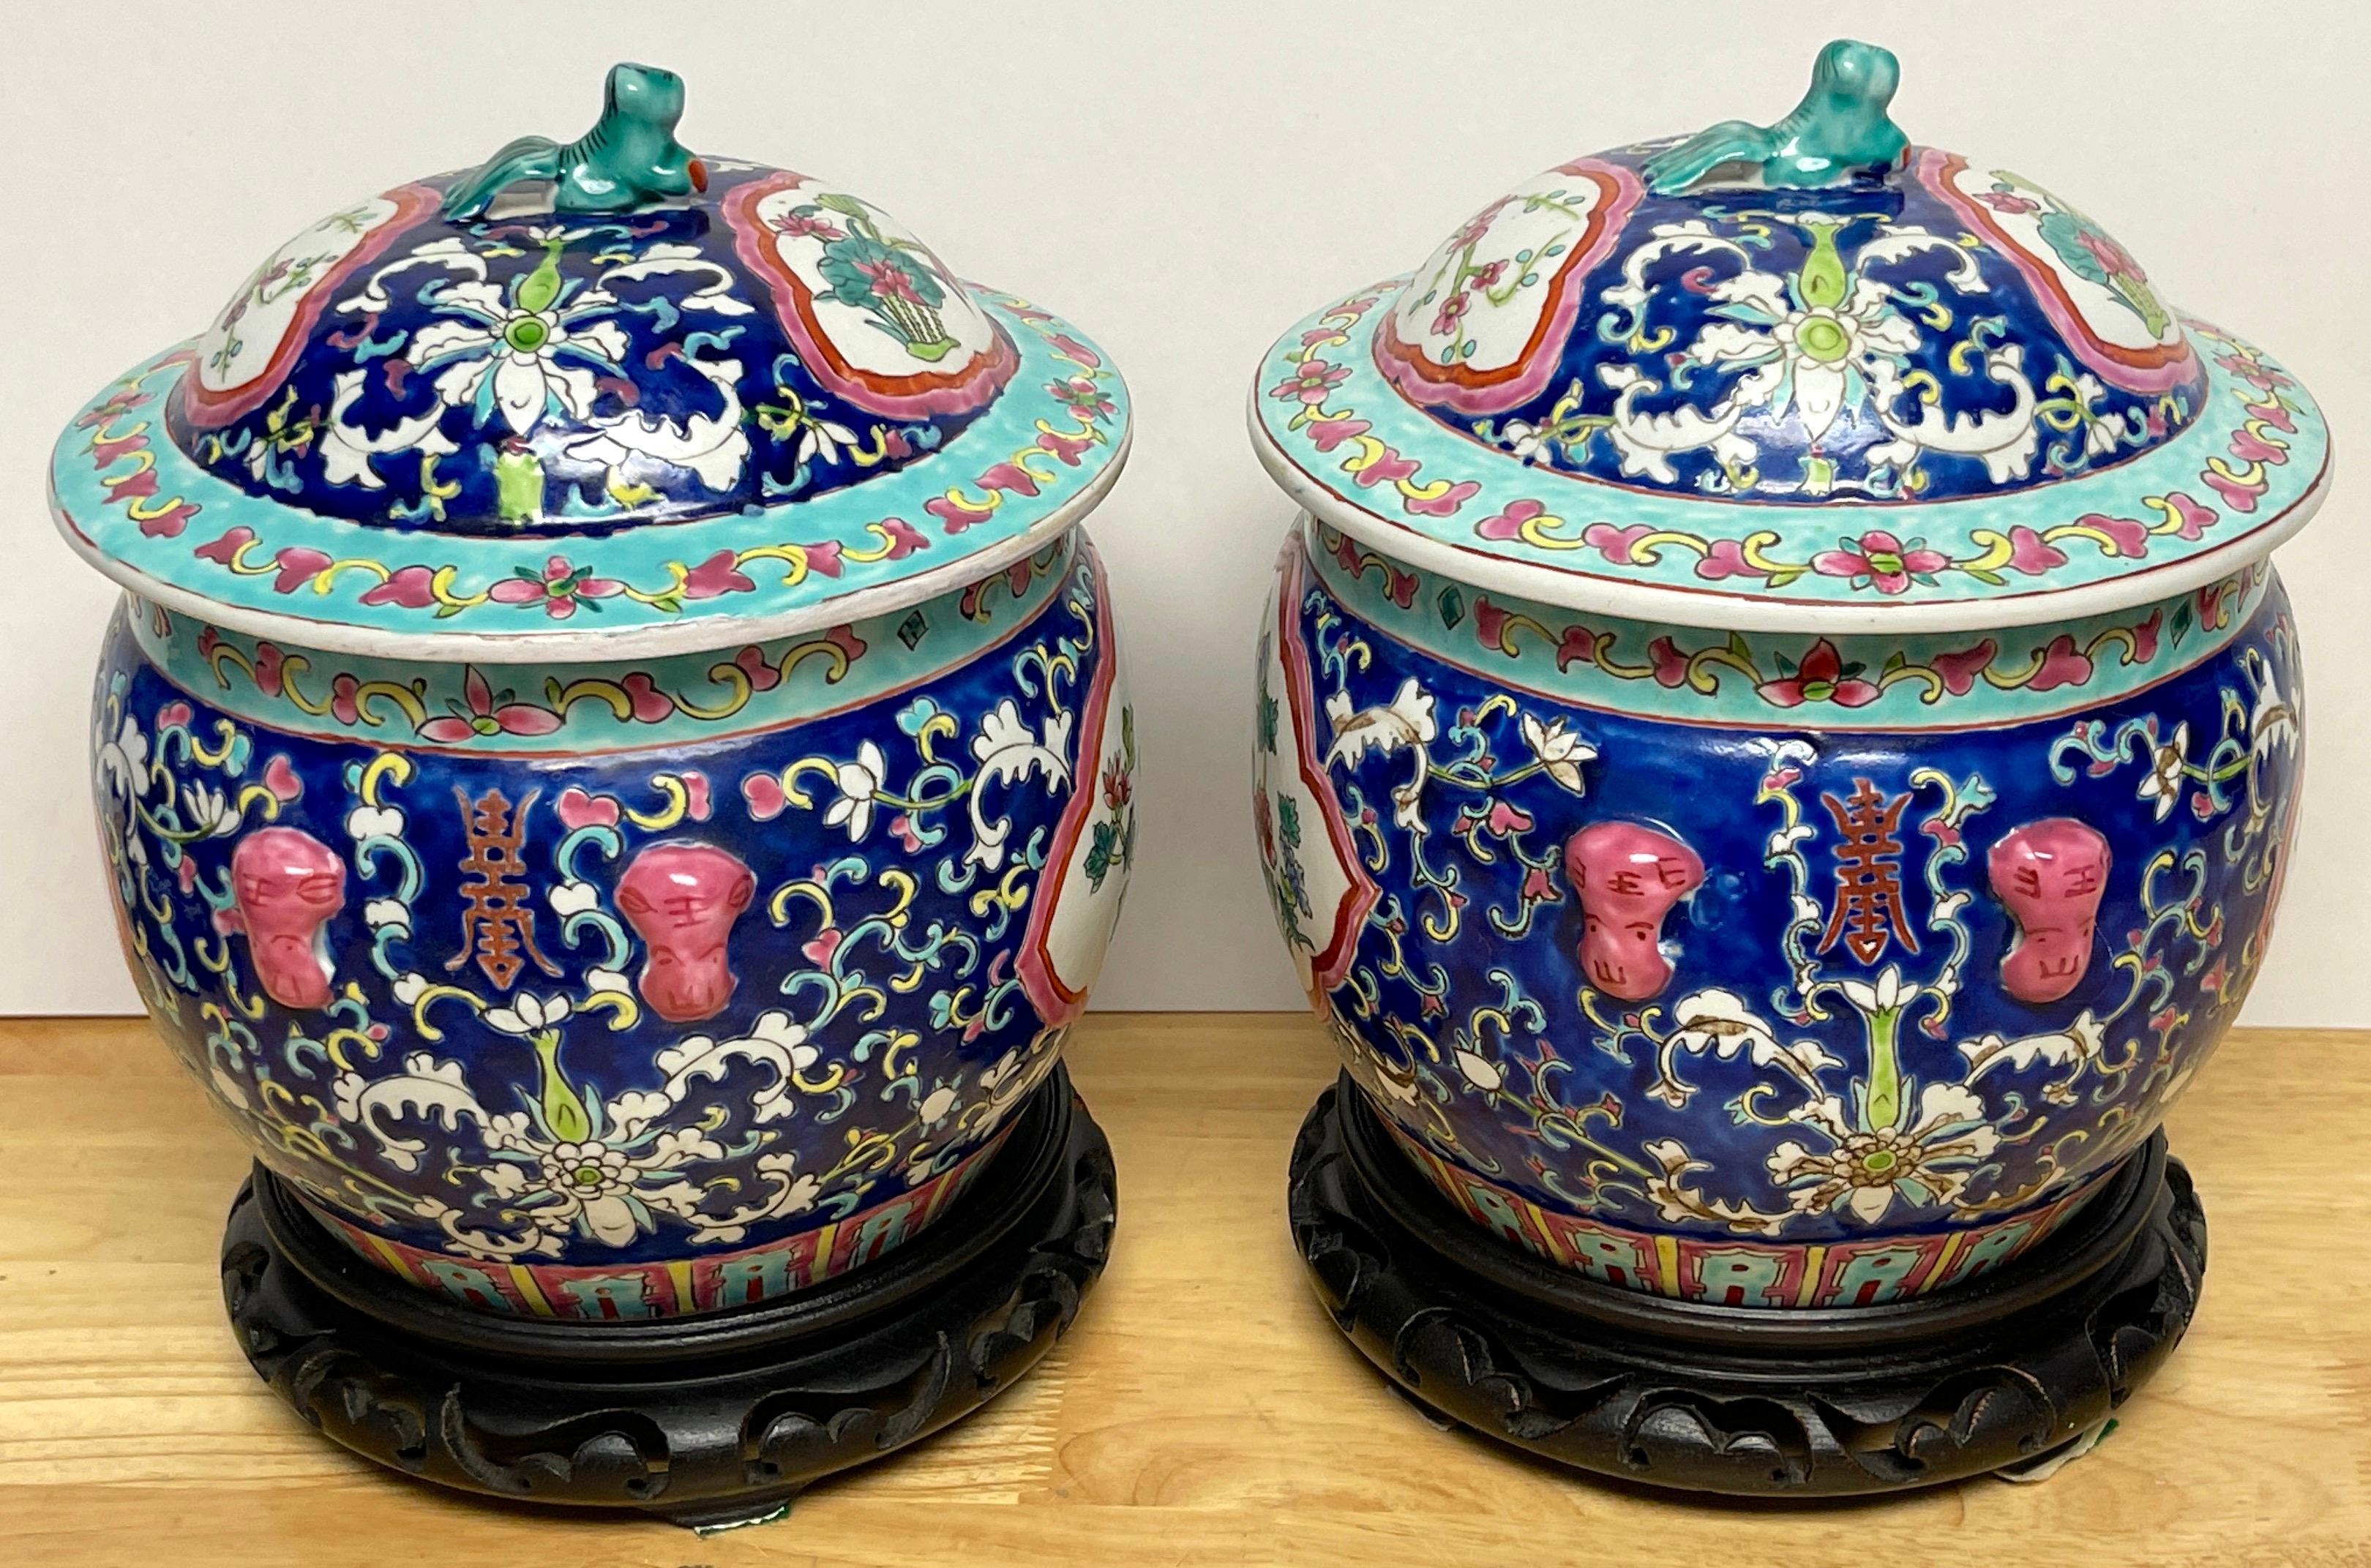 Porcelain Pair of Chinese Export Famille-Rose Enameled Covered Urns & Stands  For Sale